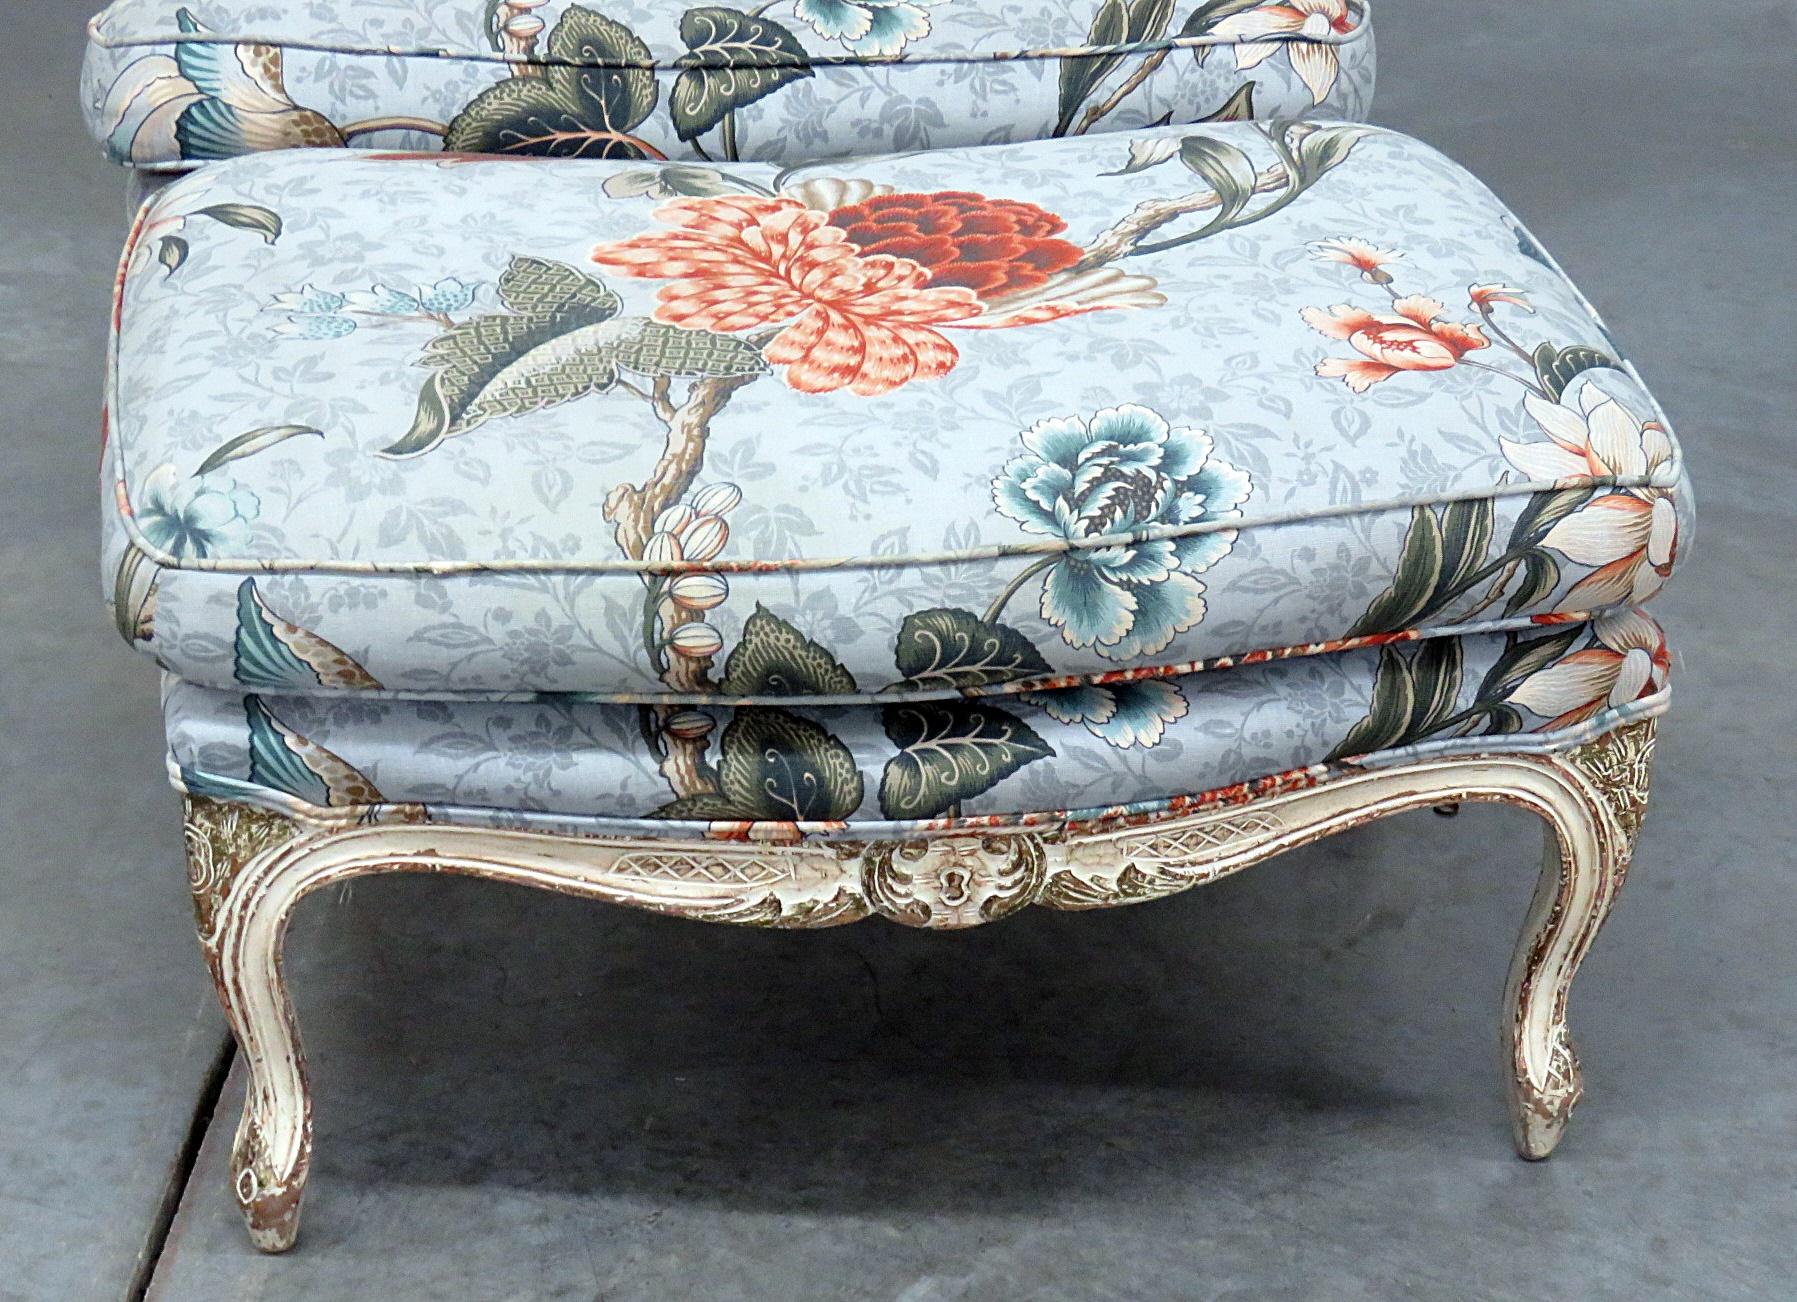 Louis XV style distressed painted bergere and ottoman. The bergere measures 37.5